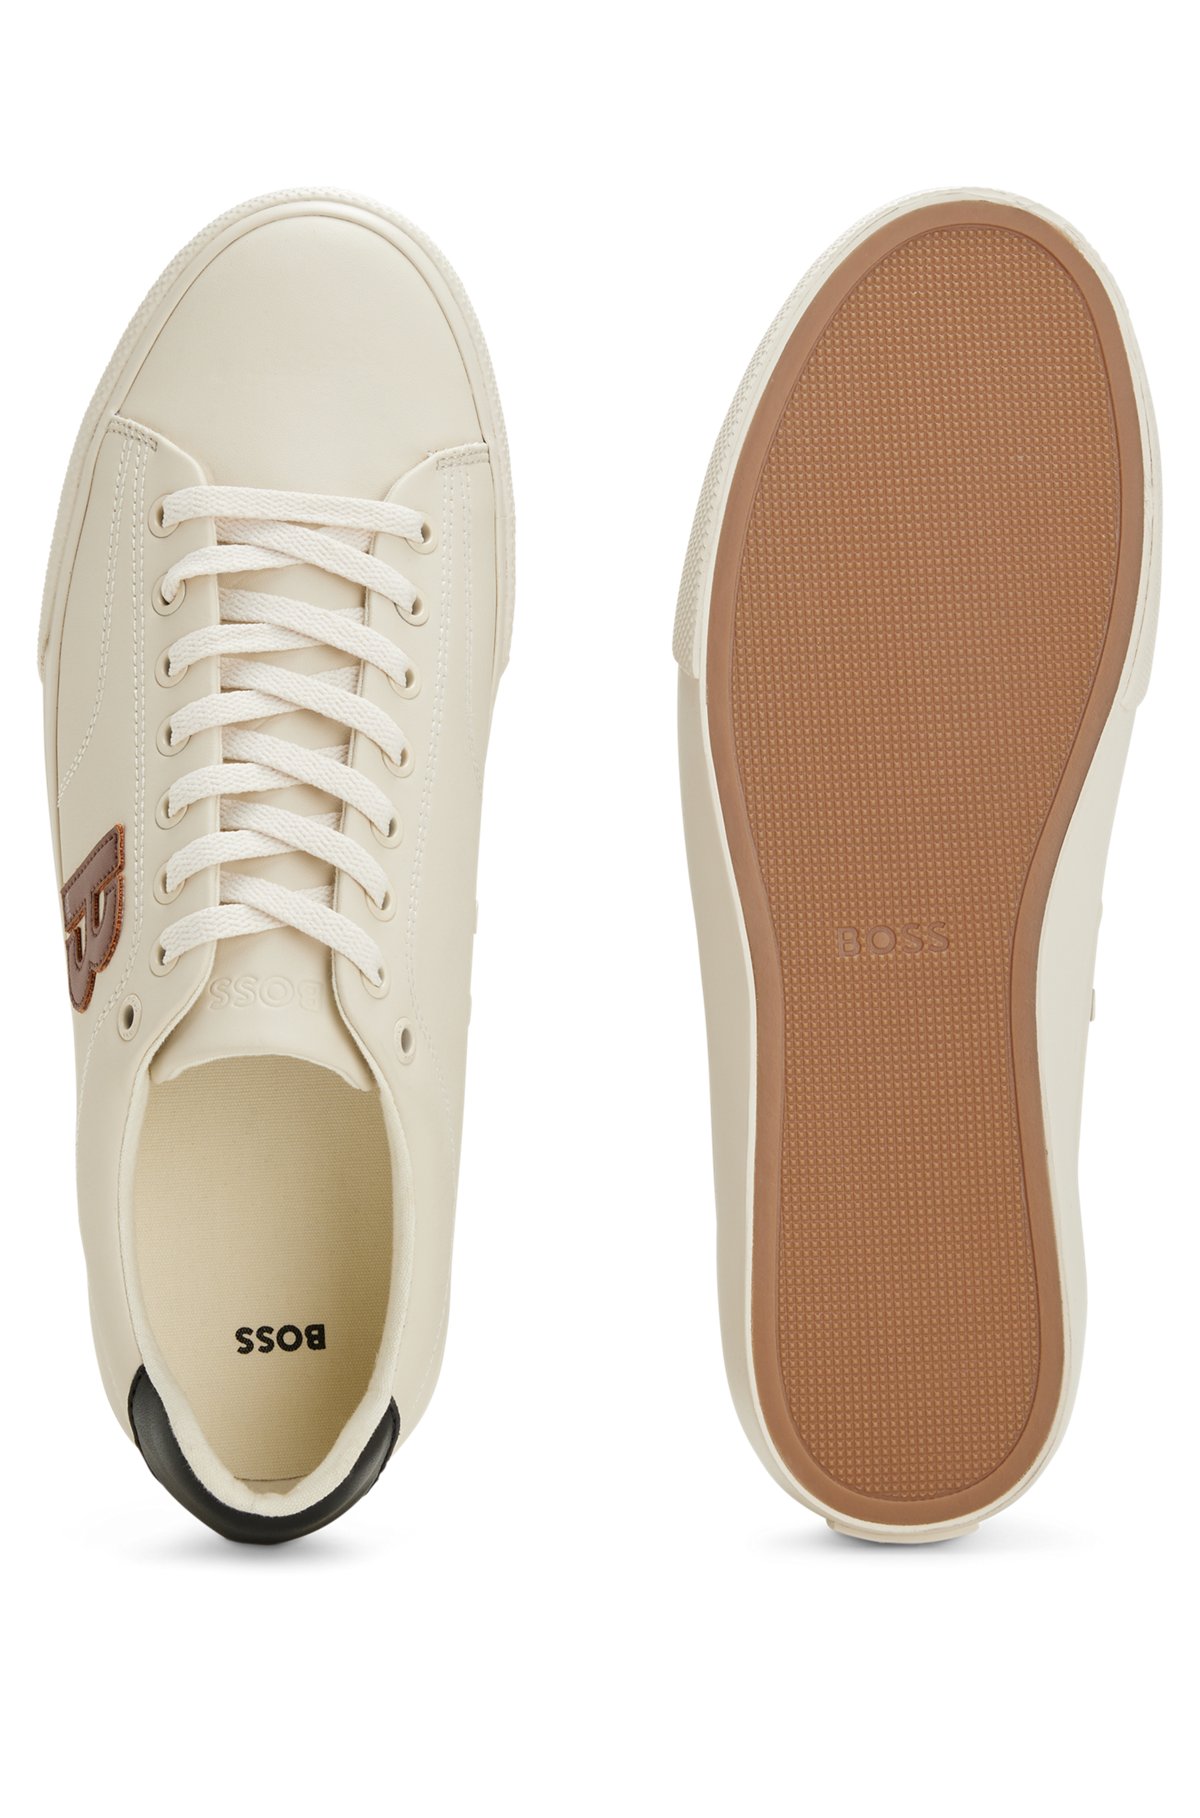 Sneakers low-top con "B" a contrasto, Bianco